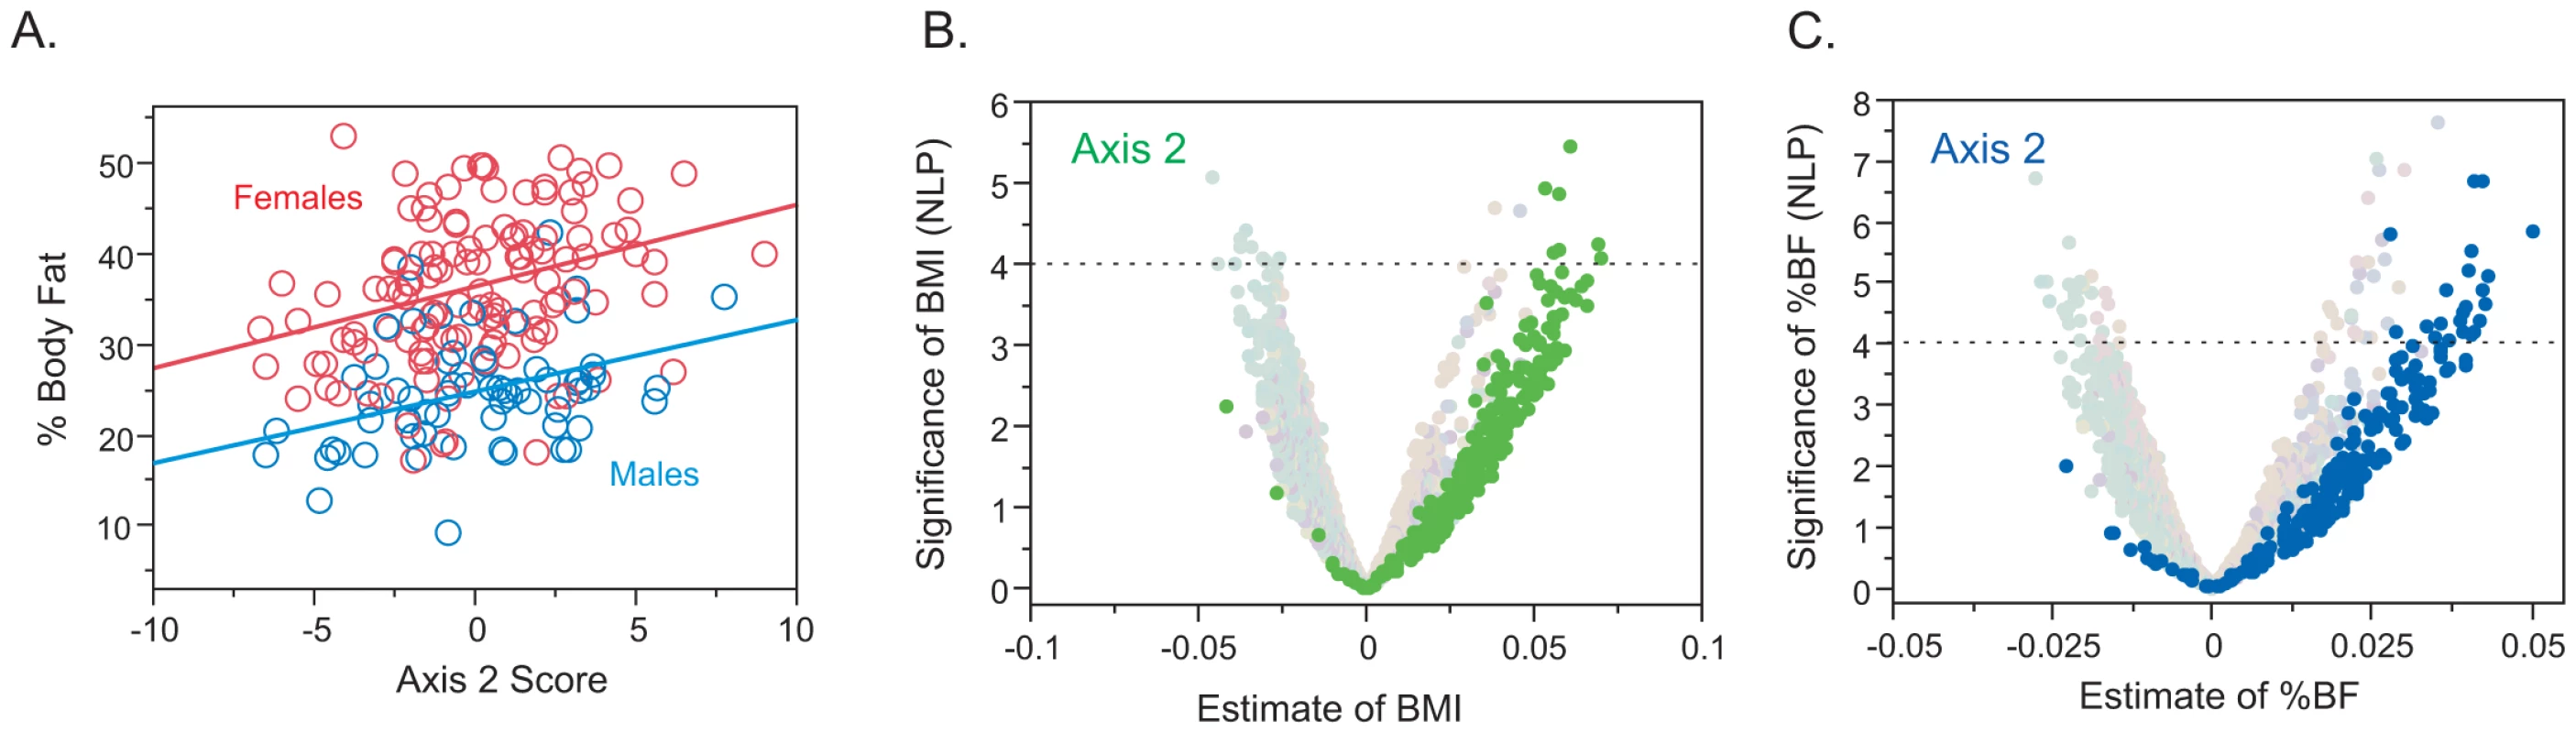 Relationship between BMI or Percent Body Fat (%BF) and Gene Expression in the CHDWB study.